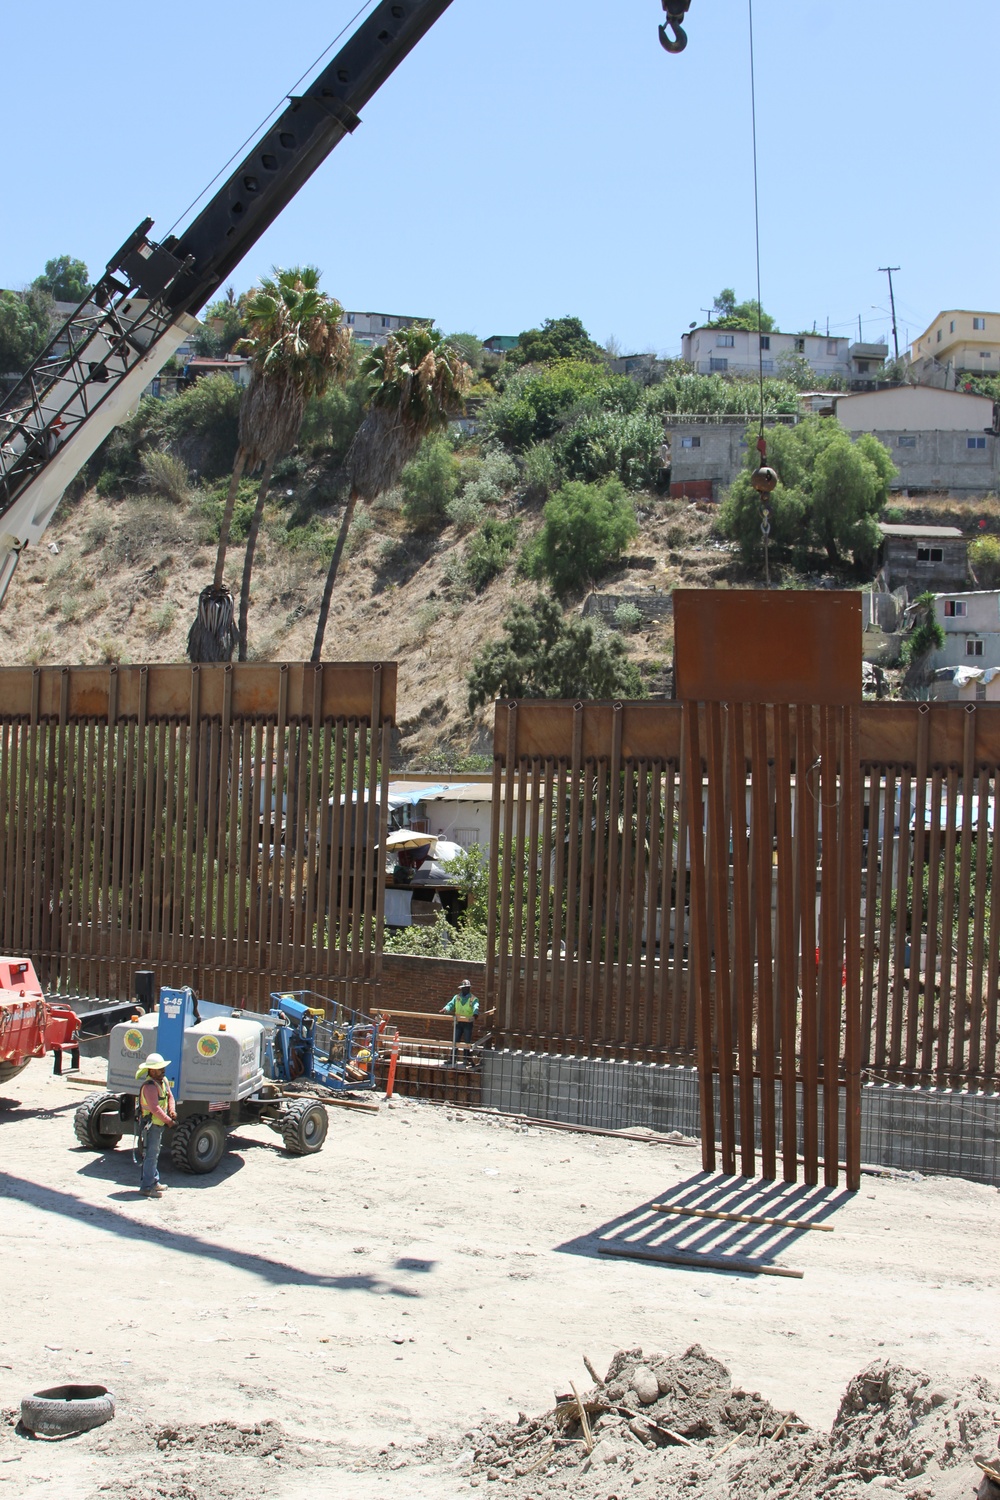 Corps supports DHS's request to build additional border barrier near San Diego